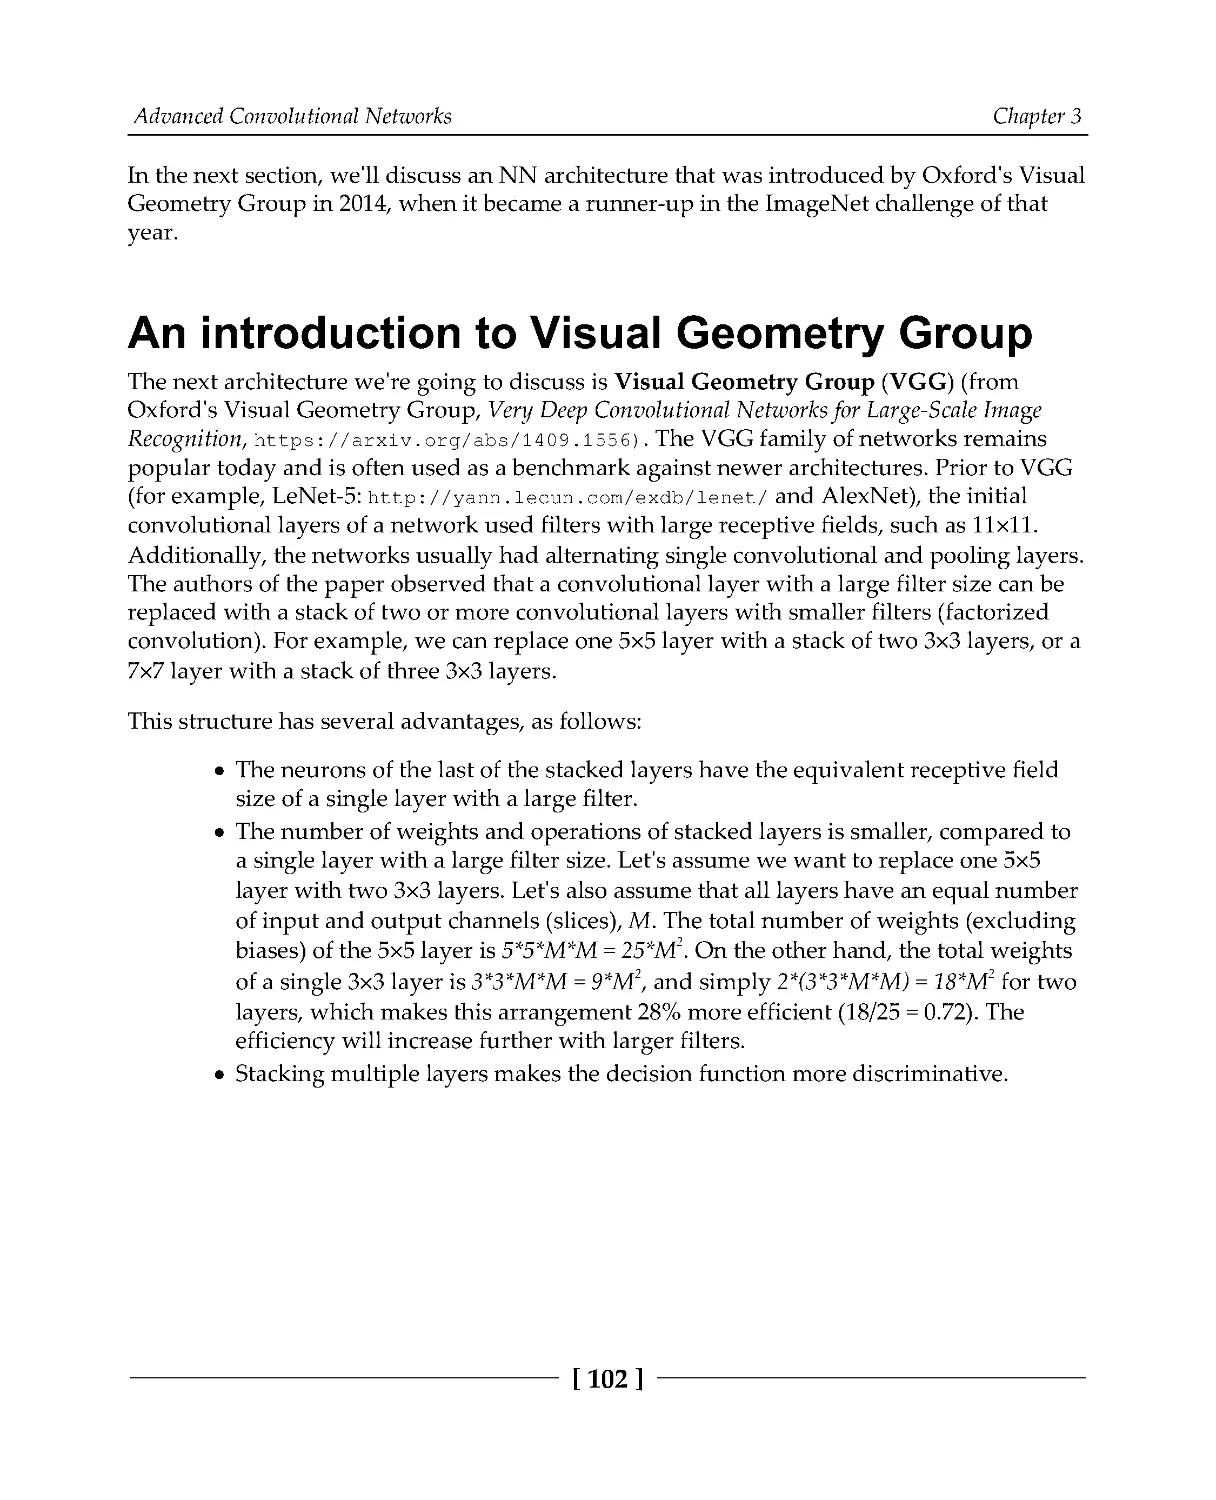 An introduction to Visual Geometry Group 